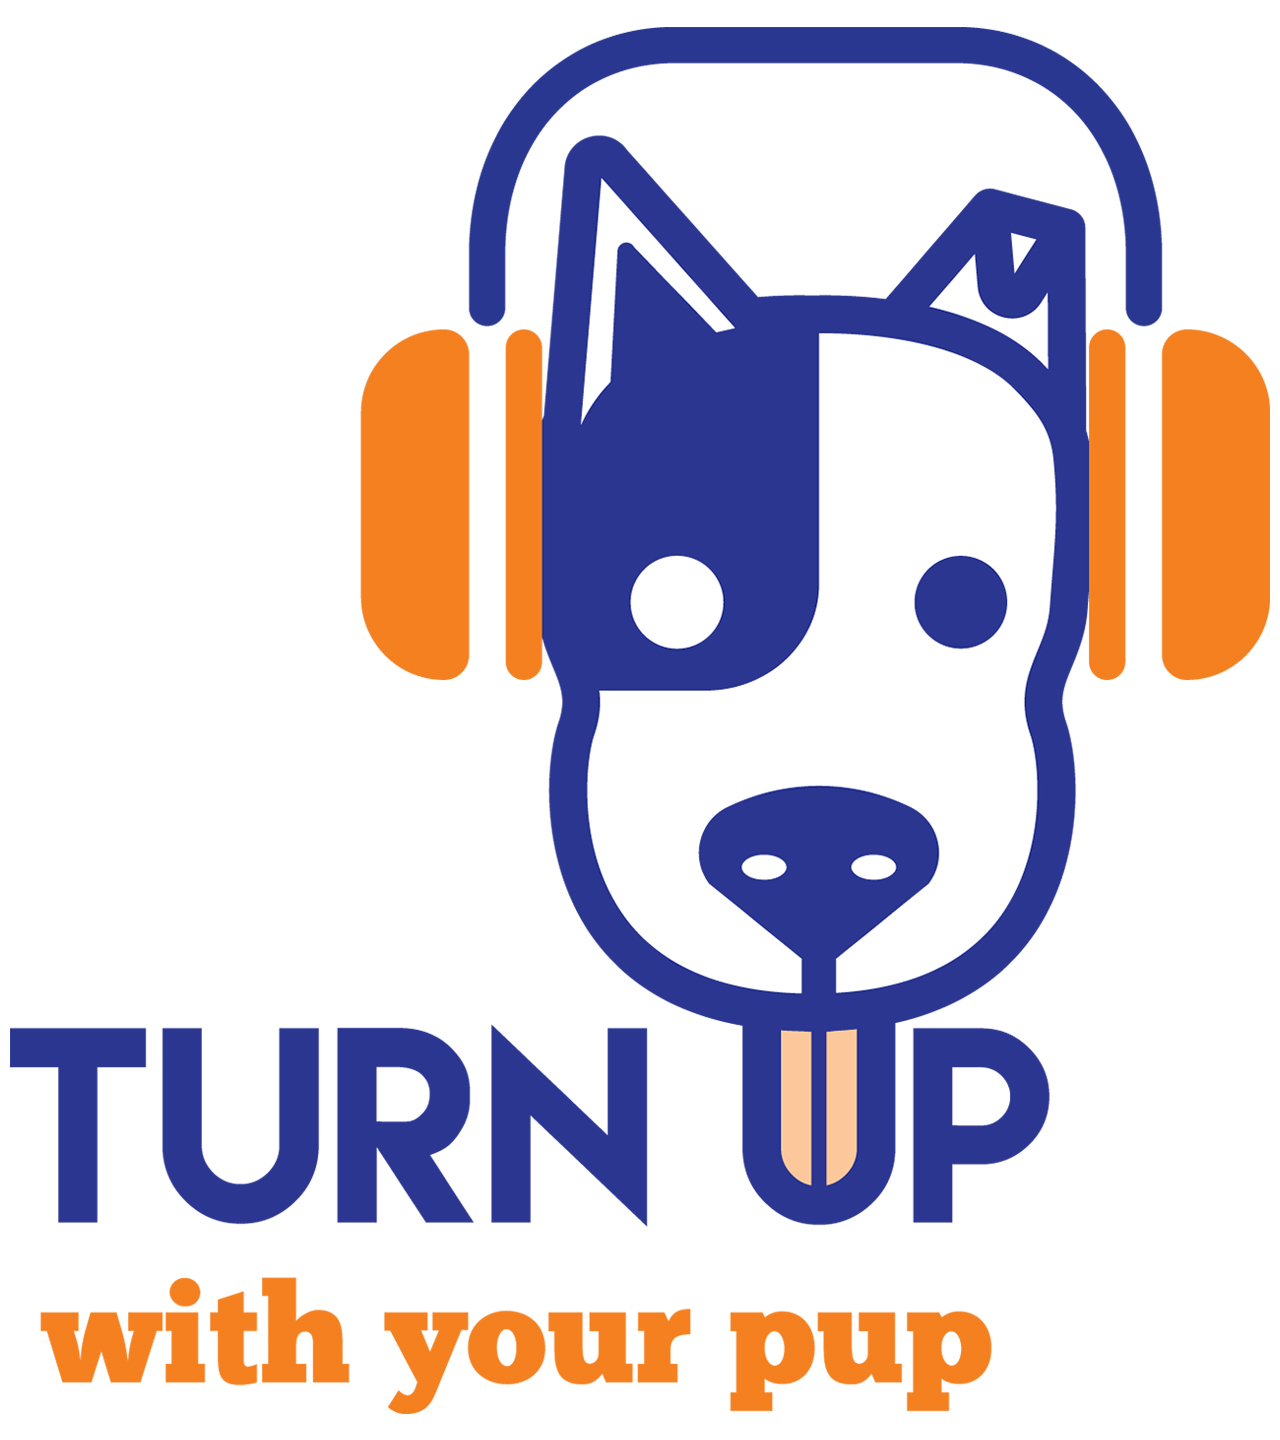 Turn Up With Your Pup logo